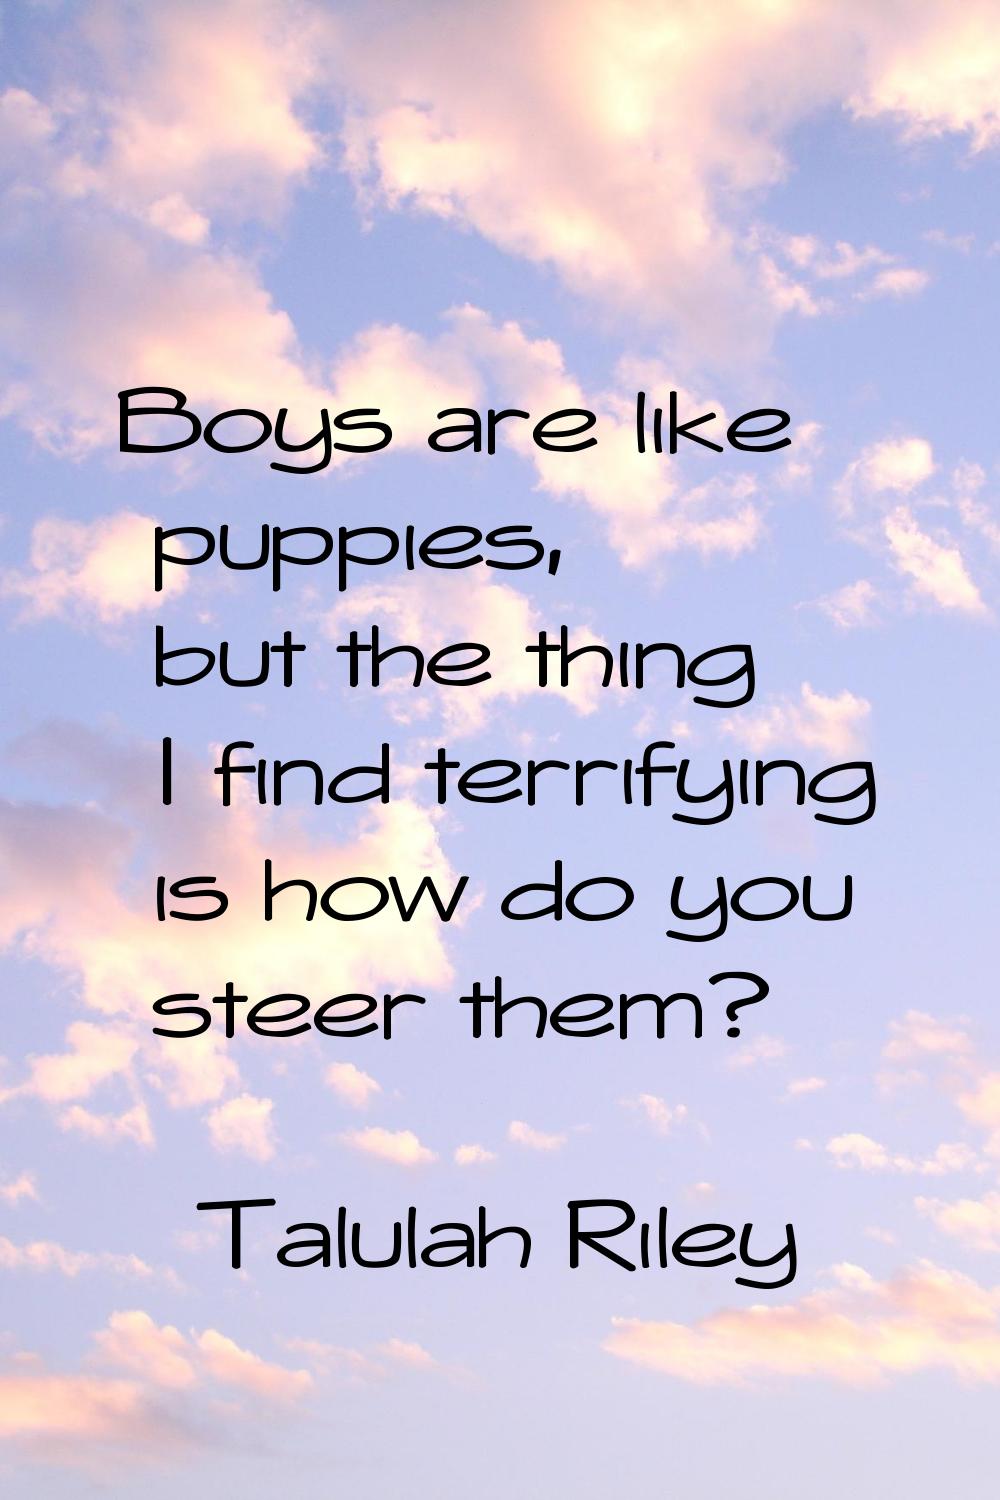 Boys are like puppies, but the thing I find terrifying is how do you steer them?